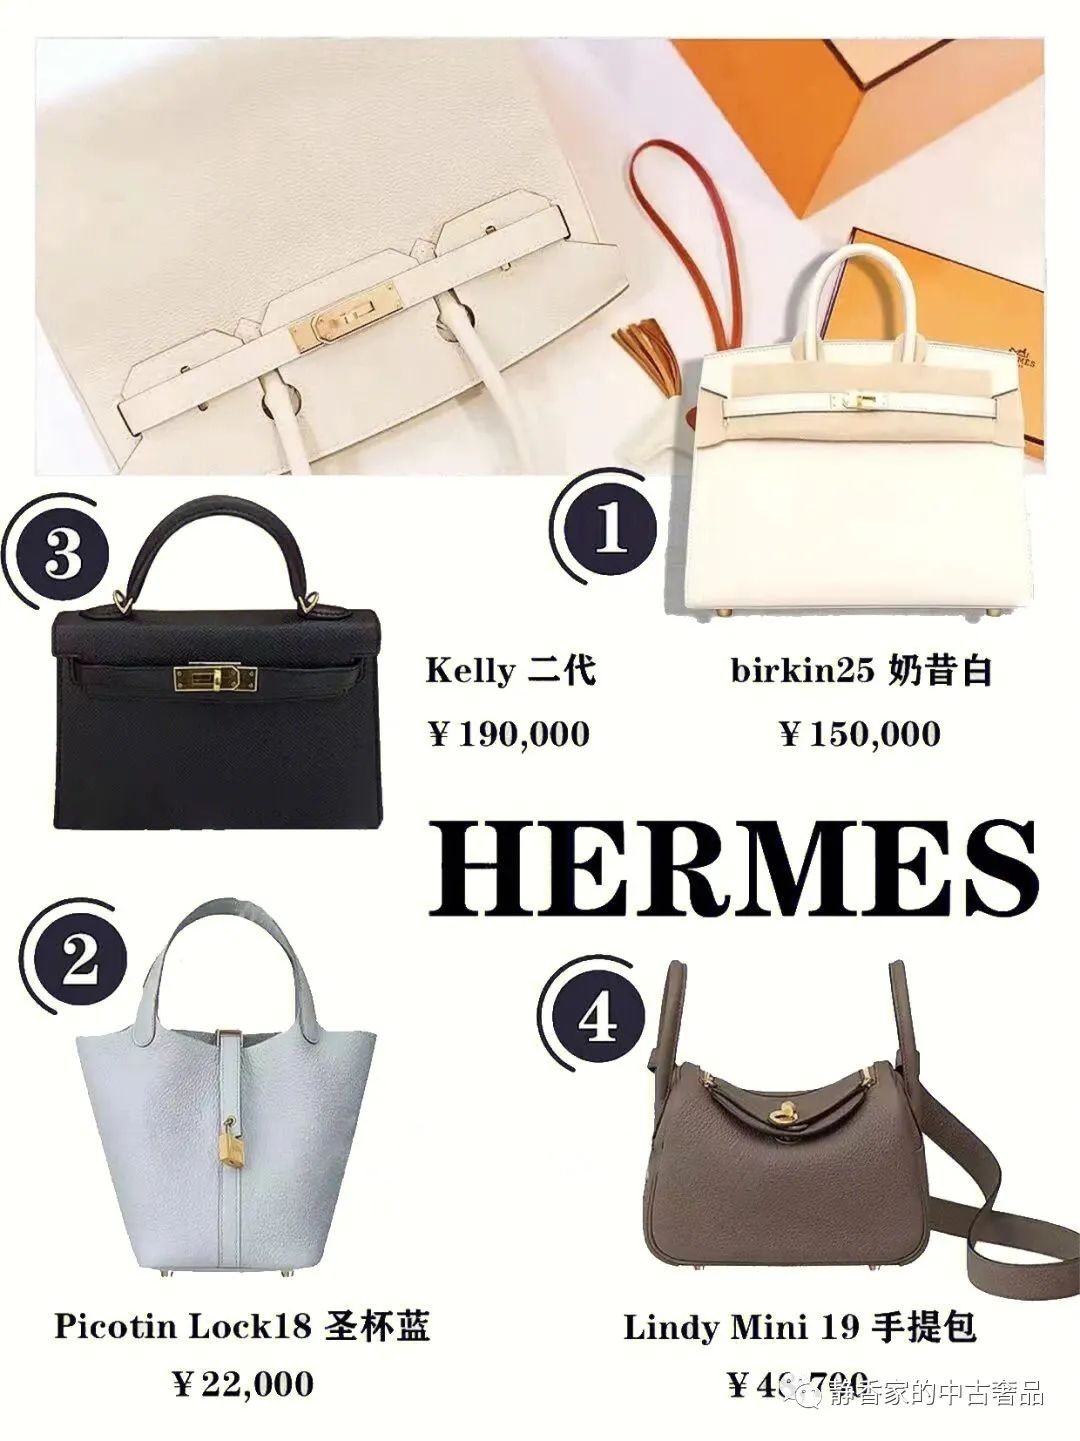 Top 30 designer bags that were bought out of stock in 2022-Best Quality Fake designer Bag Review, Replica designer bag ru